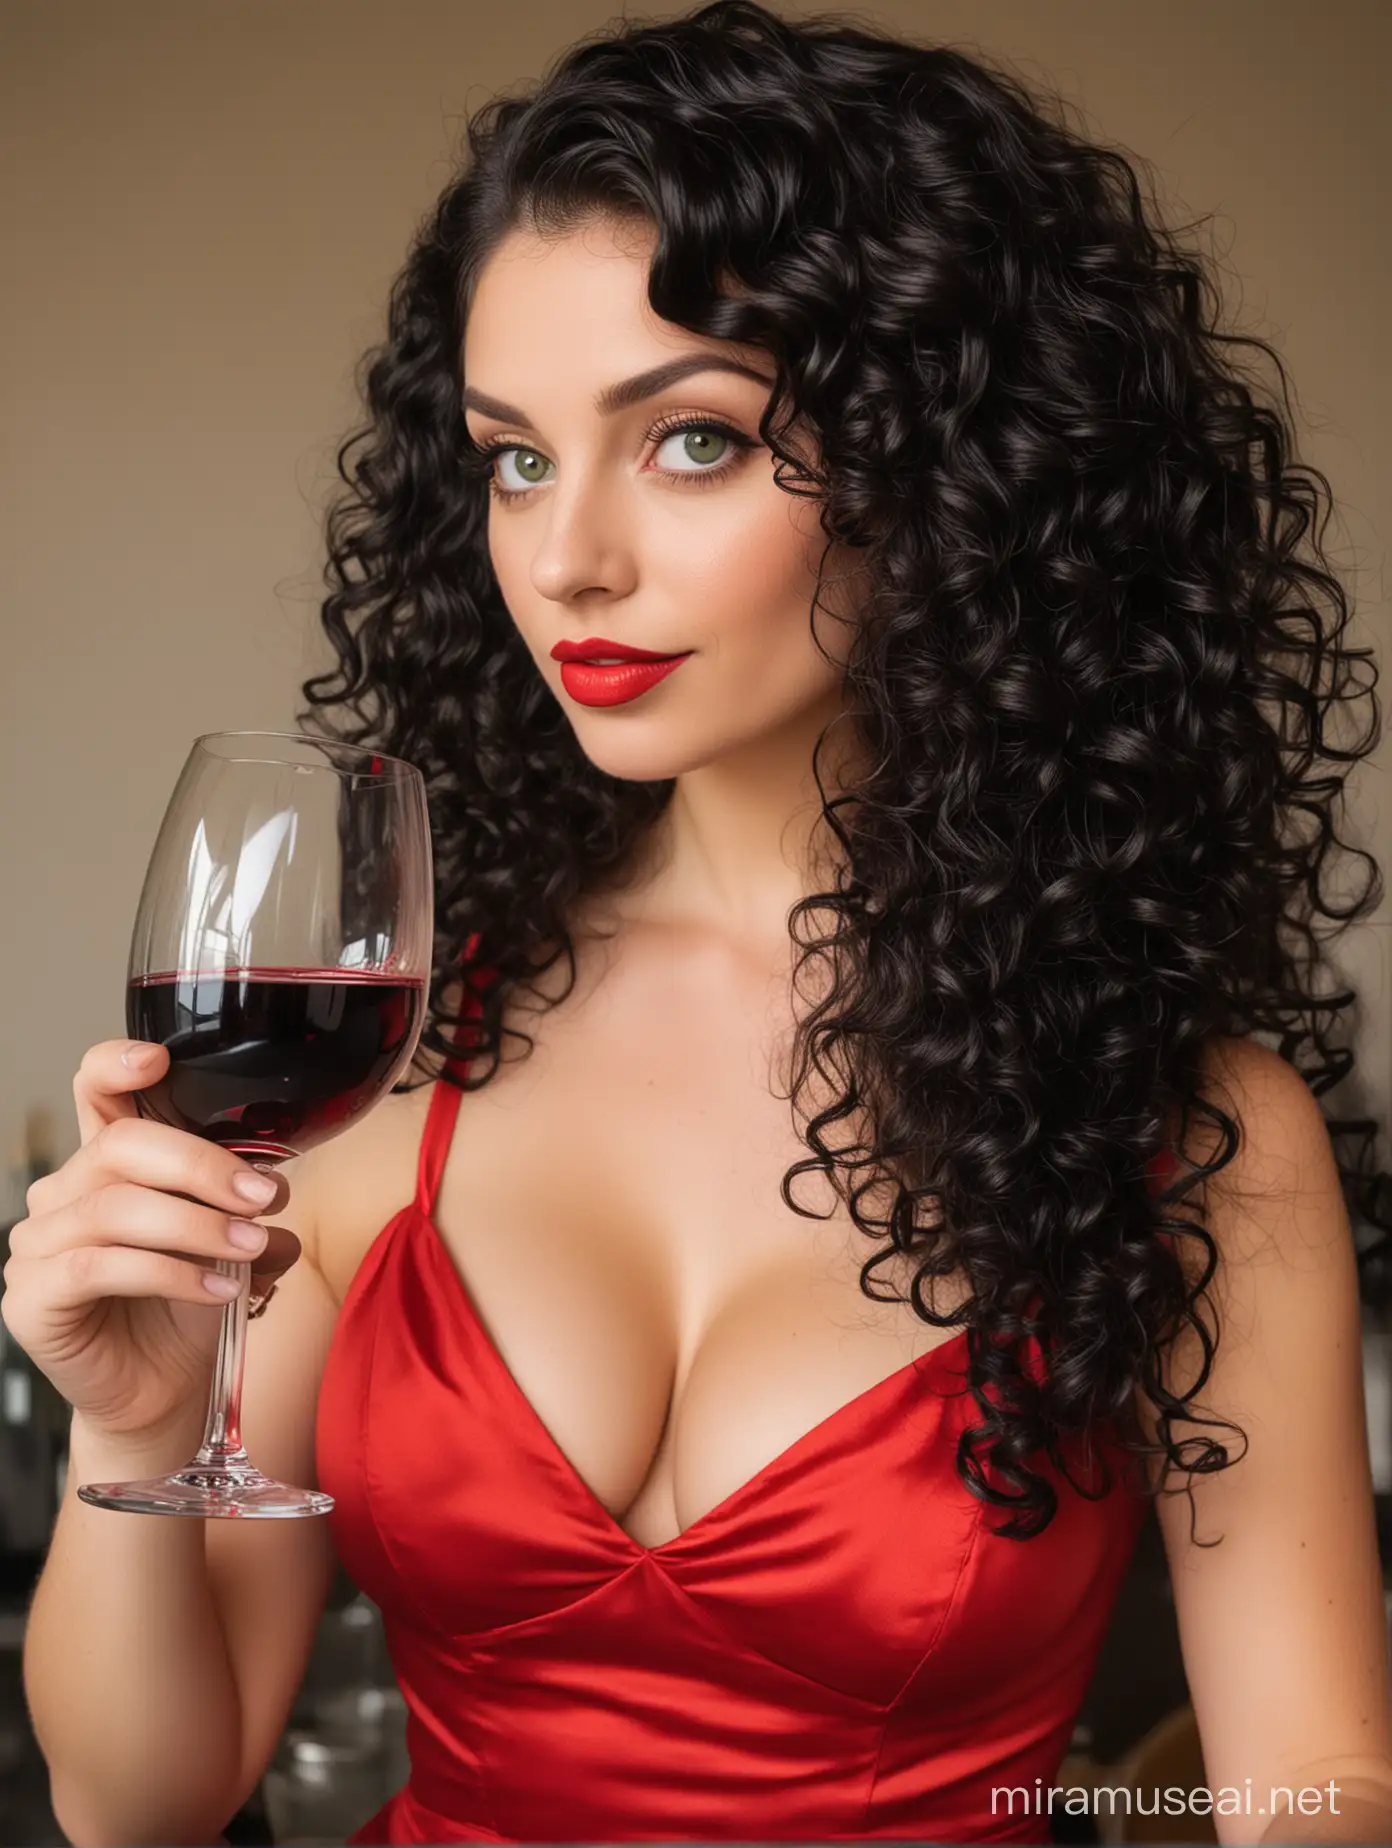 Elegant Woman in Red Dress Holding Wine Glass